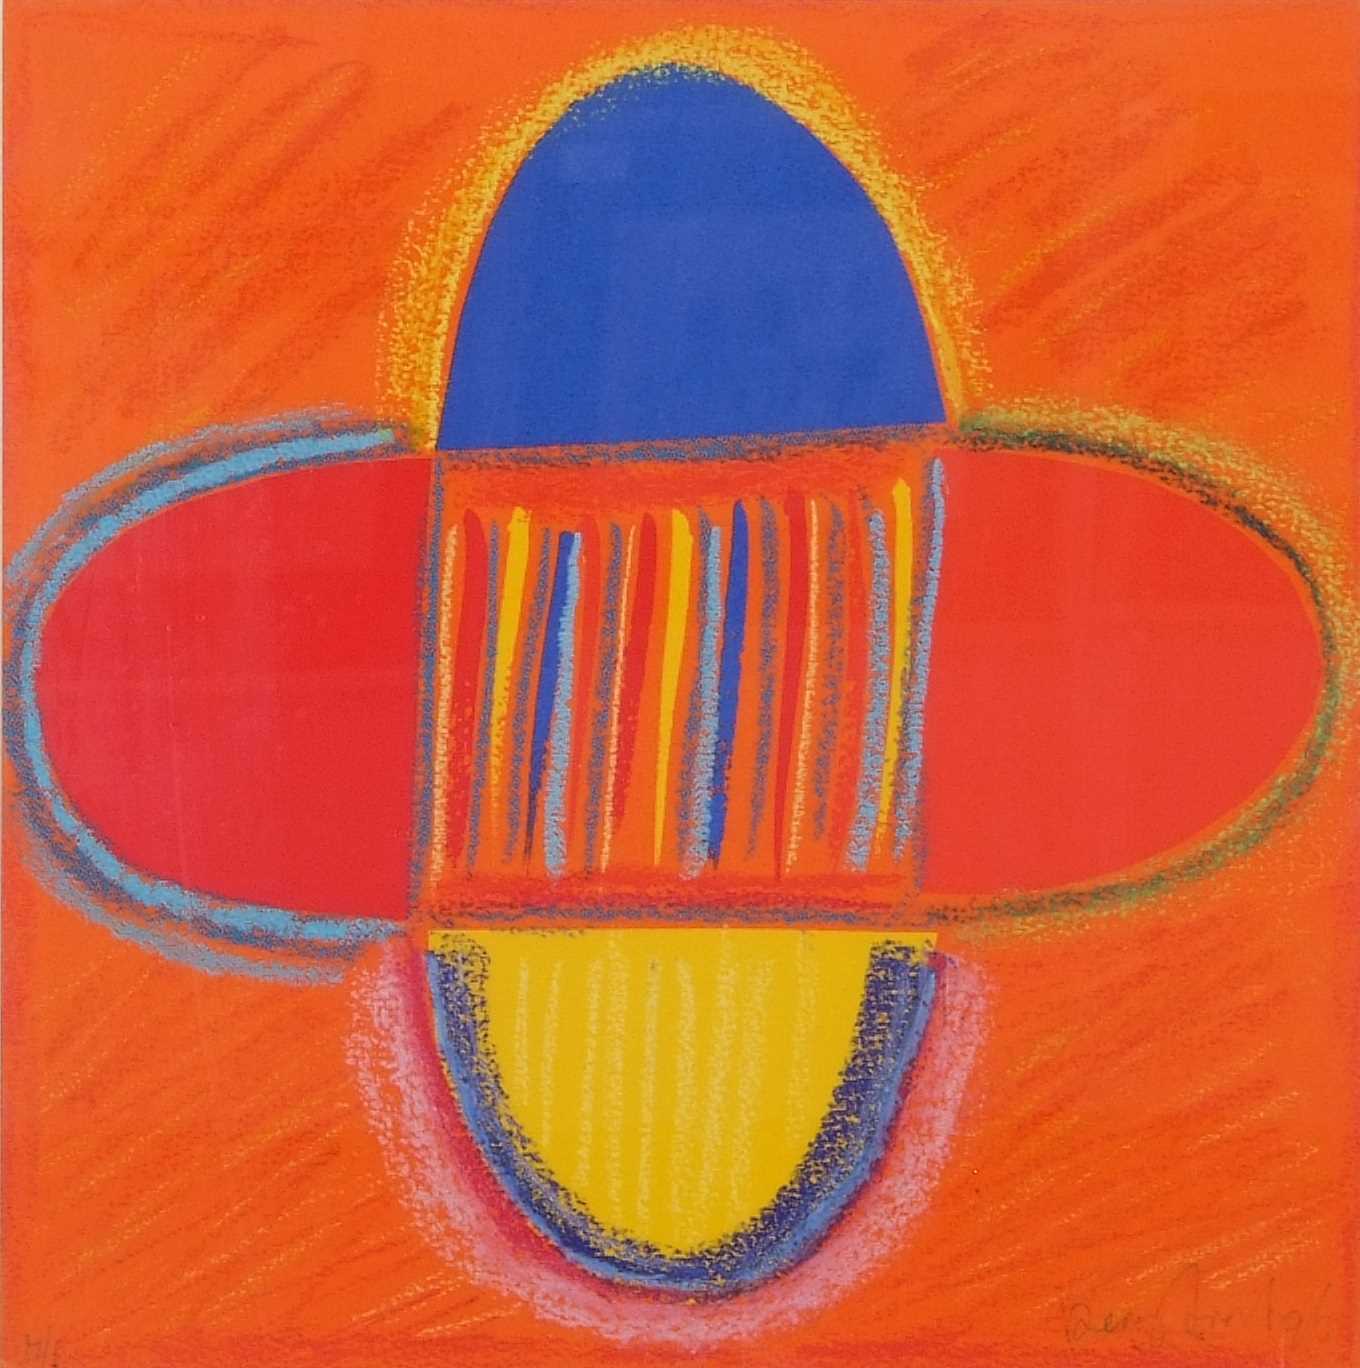 Terry Frost RA (1915-2003), Orange Sea, colour screen print and pastel on paper, signed and dated 96 - Image 2 of 2